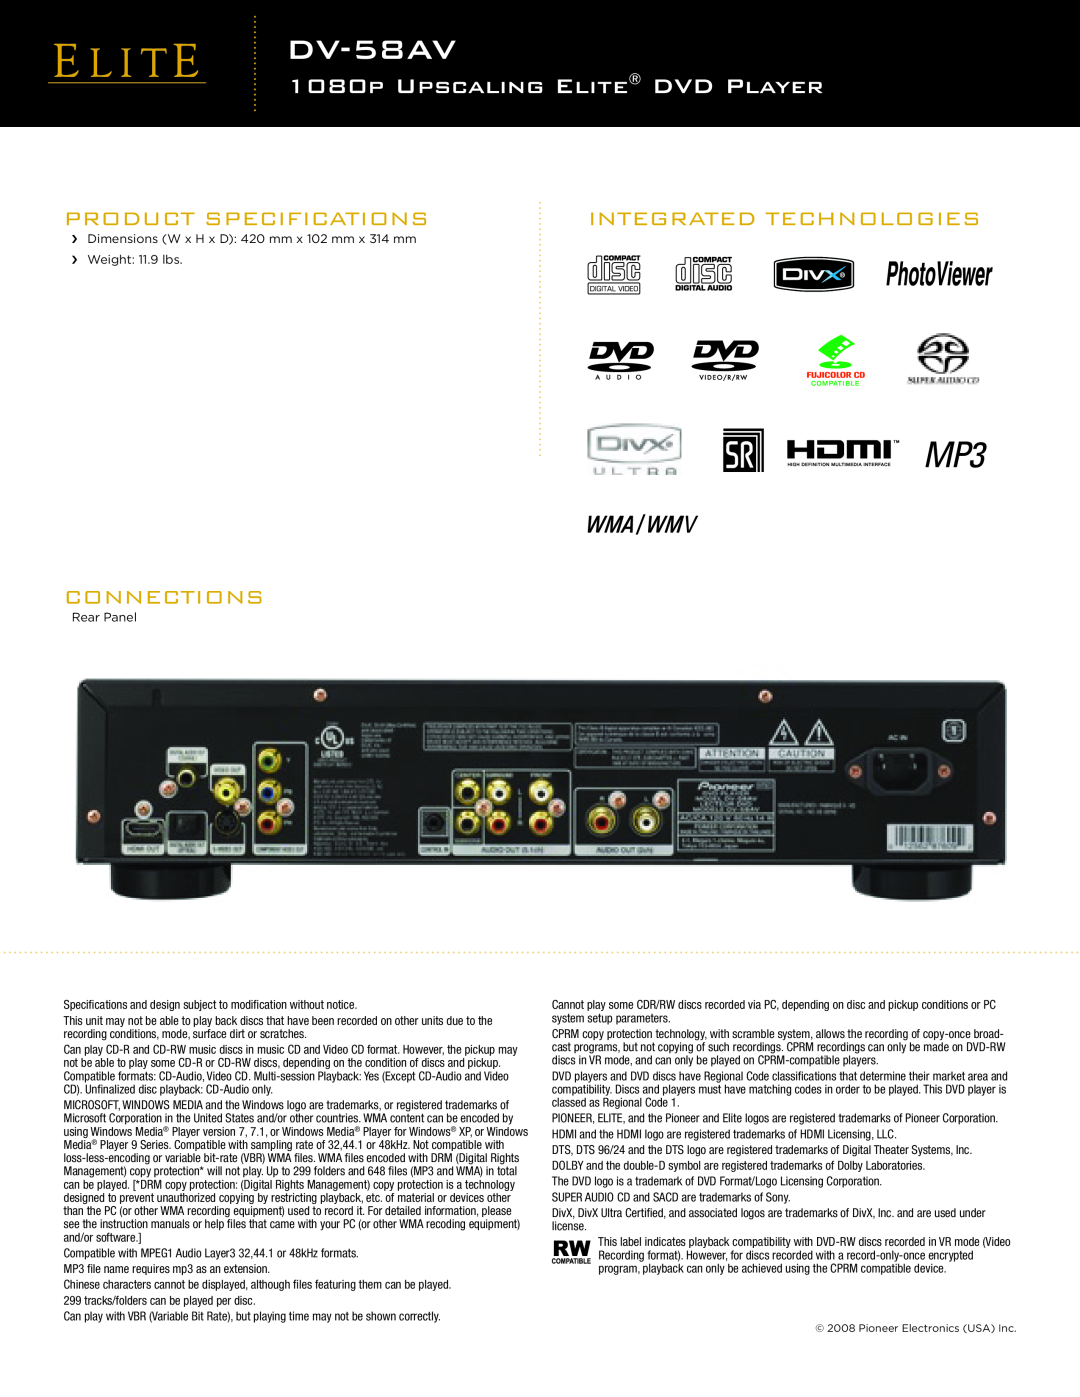 Elite DV-58AV manual Product Specifications, Integrated Technologies, 1080P UPSCALING ELITE DVD PLAYER, Connections 